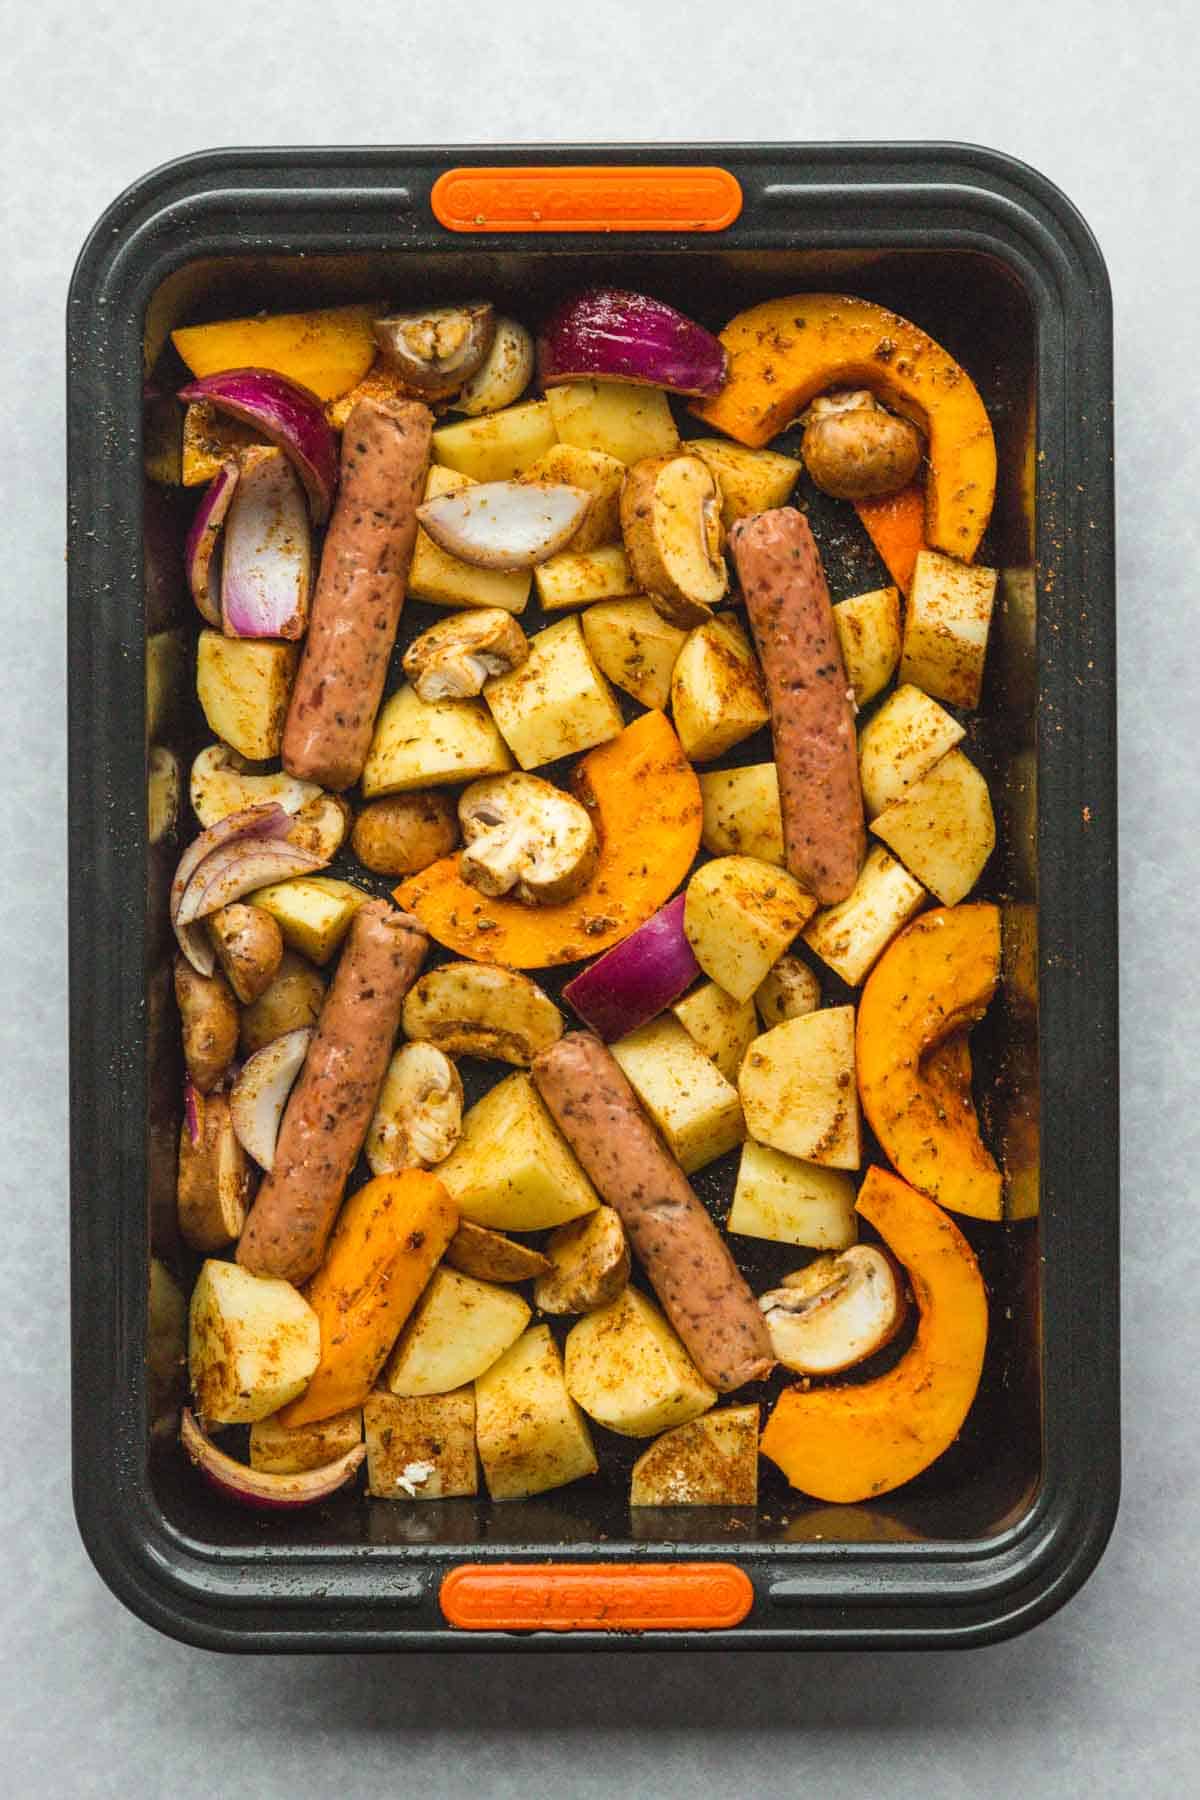 Chopped veggies and sausages in a roasting tin with seasonings and olive oil